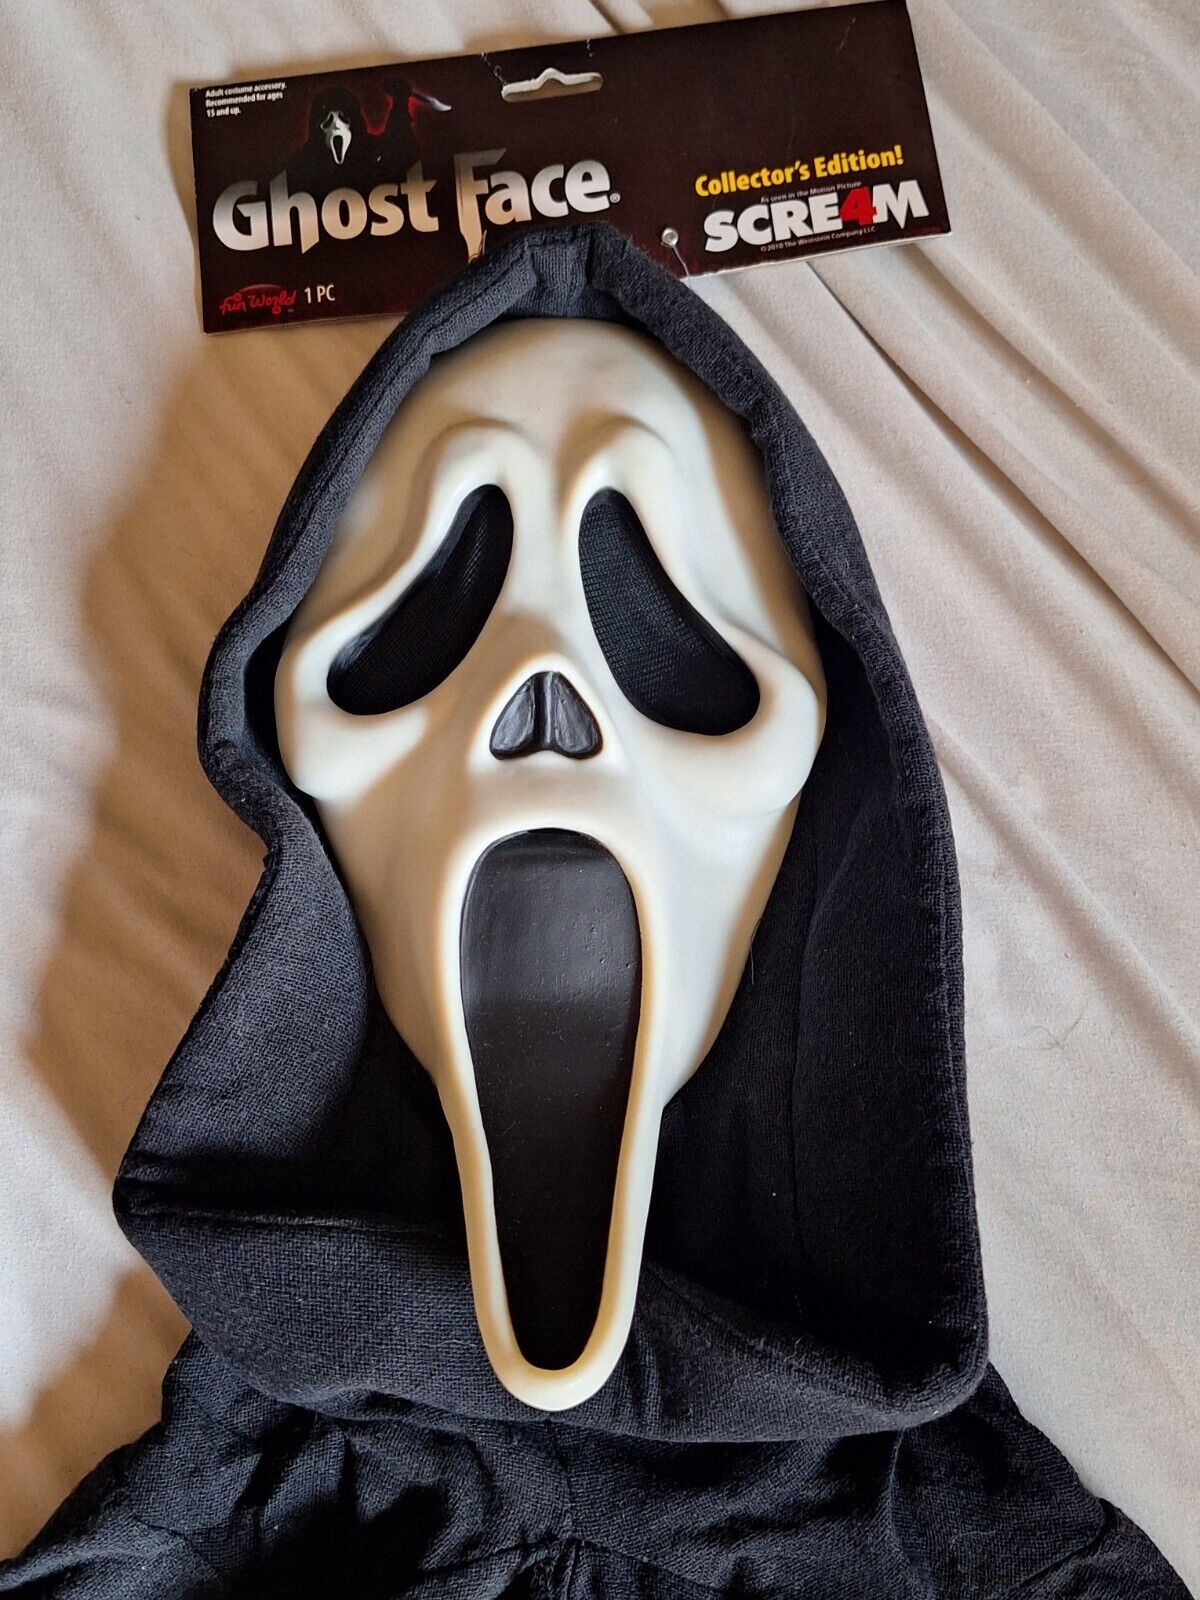 Scream 4 HHN Halloween Horror Nights Collector's Edition CE Ghost Face Mask